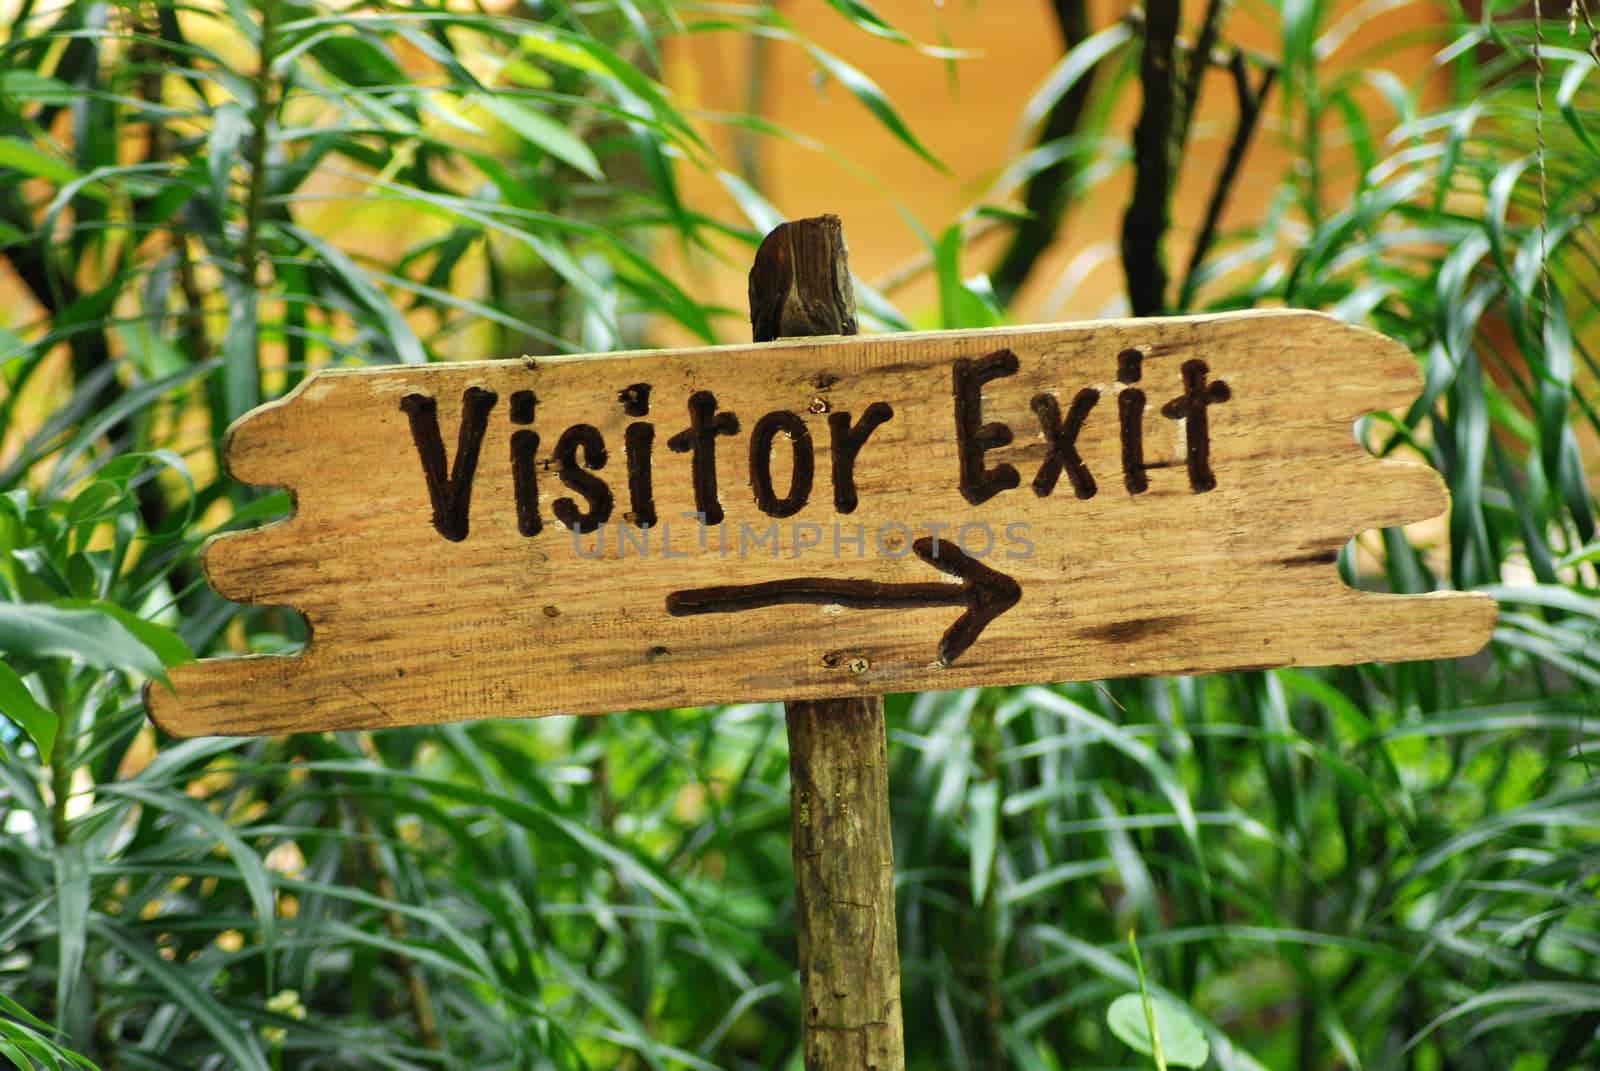 A visitors exit sing in the park